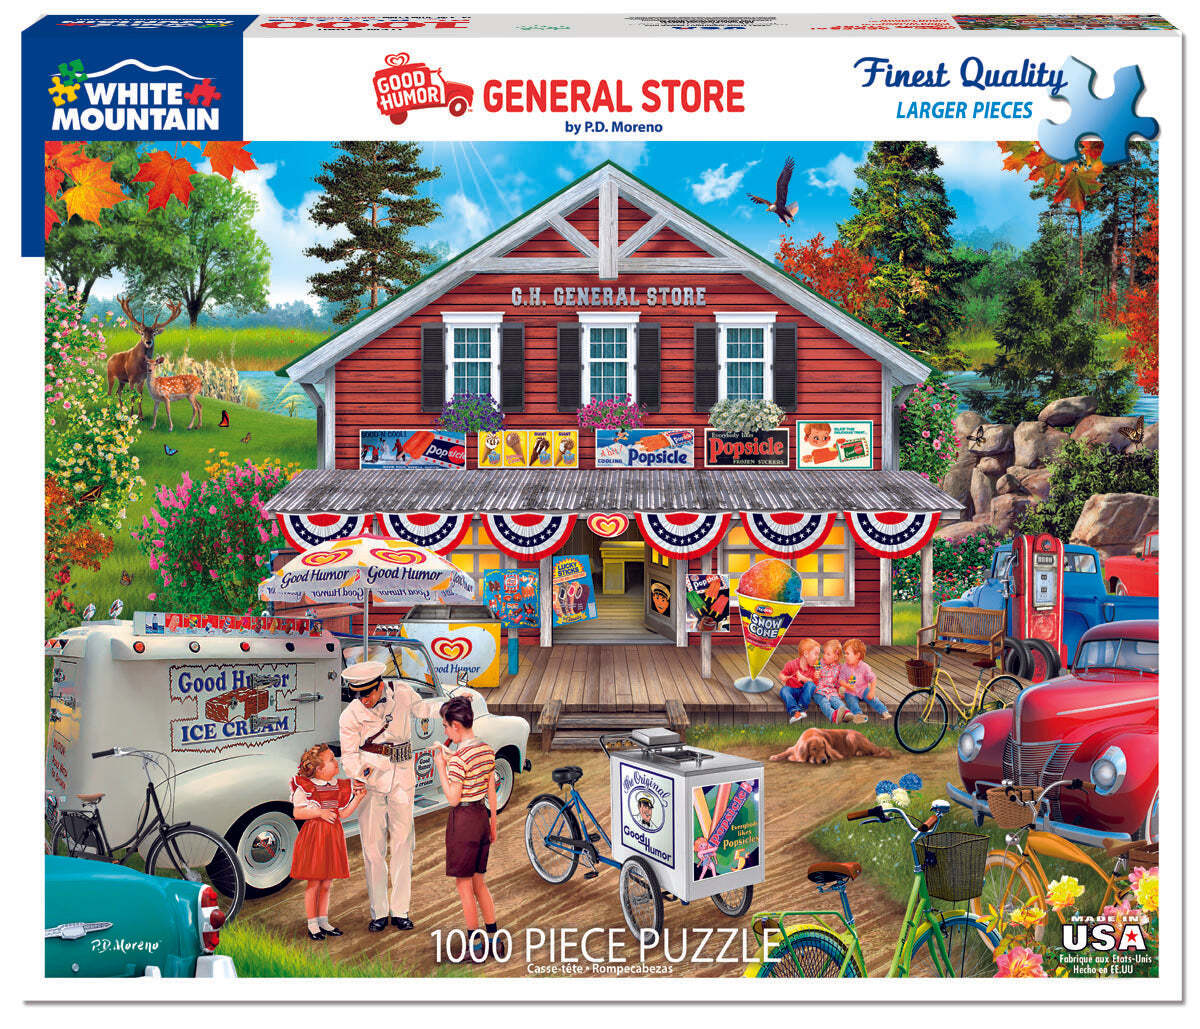 Good Humor General Store (1640pz) - 1000 Piece Jigsaw Puzzle